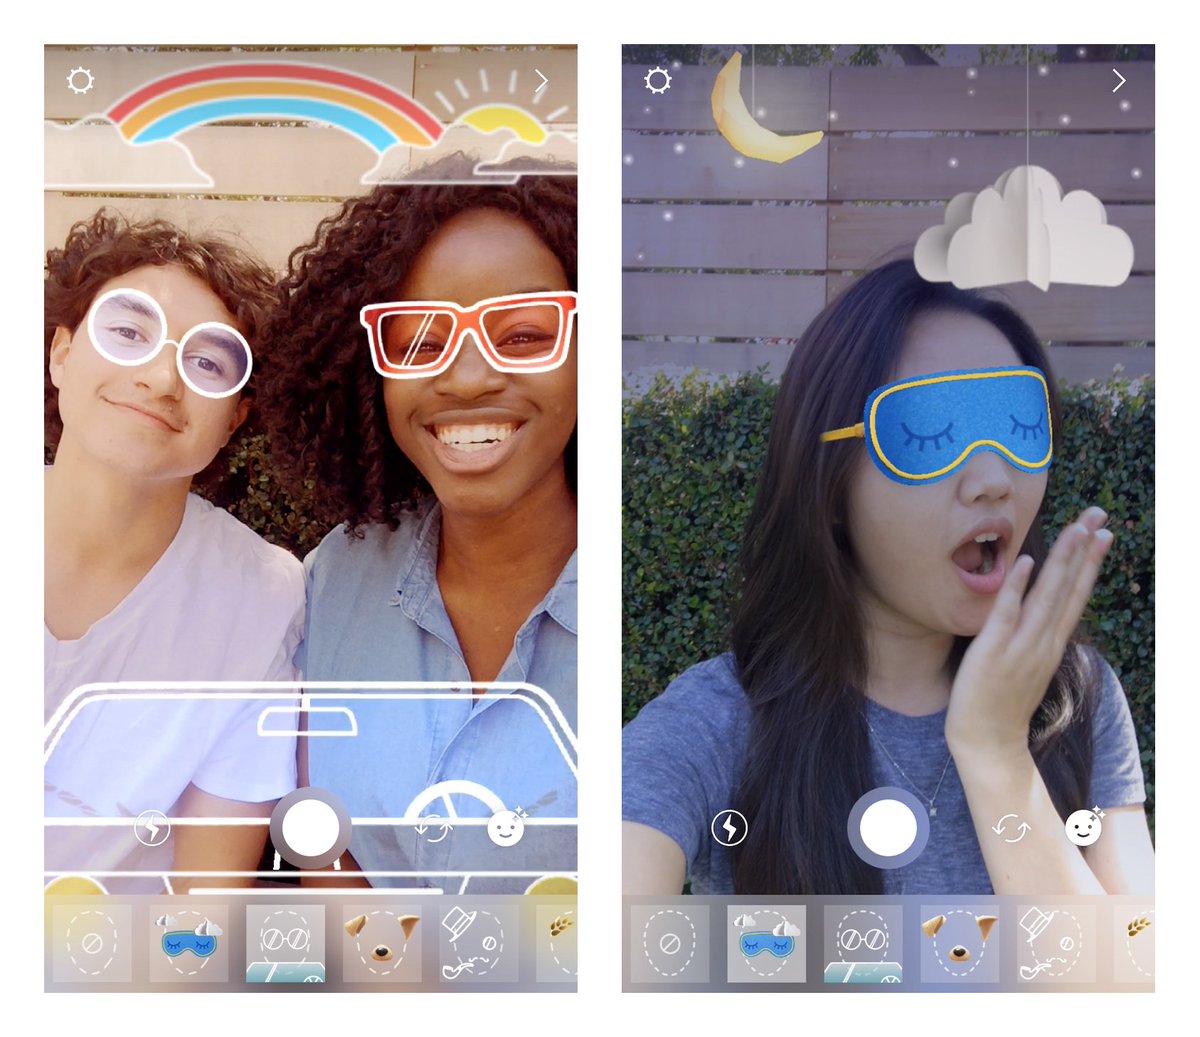 Instagram on Twitter: "New face filters alert! Bring along a friend for the  road trip filter 🚘 or try on a sleep mask 💤 https://t.co/L52LYCBXoo" /  Twitter